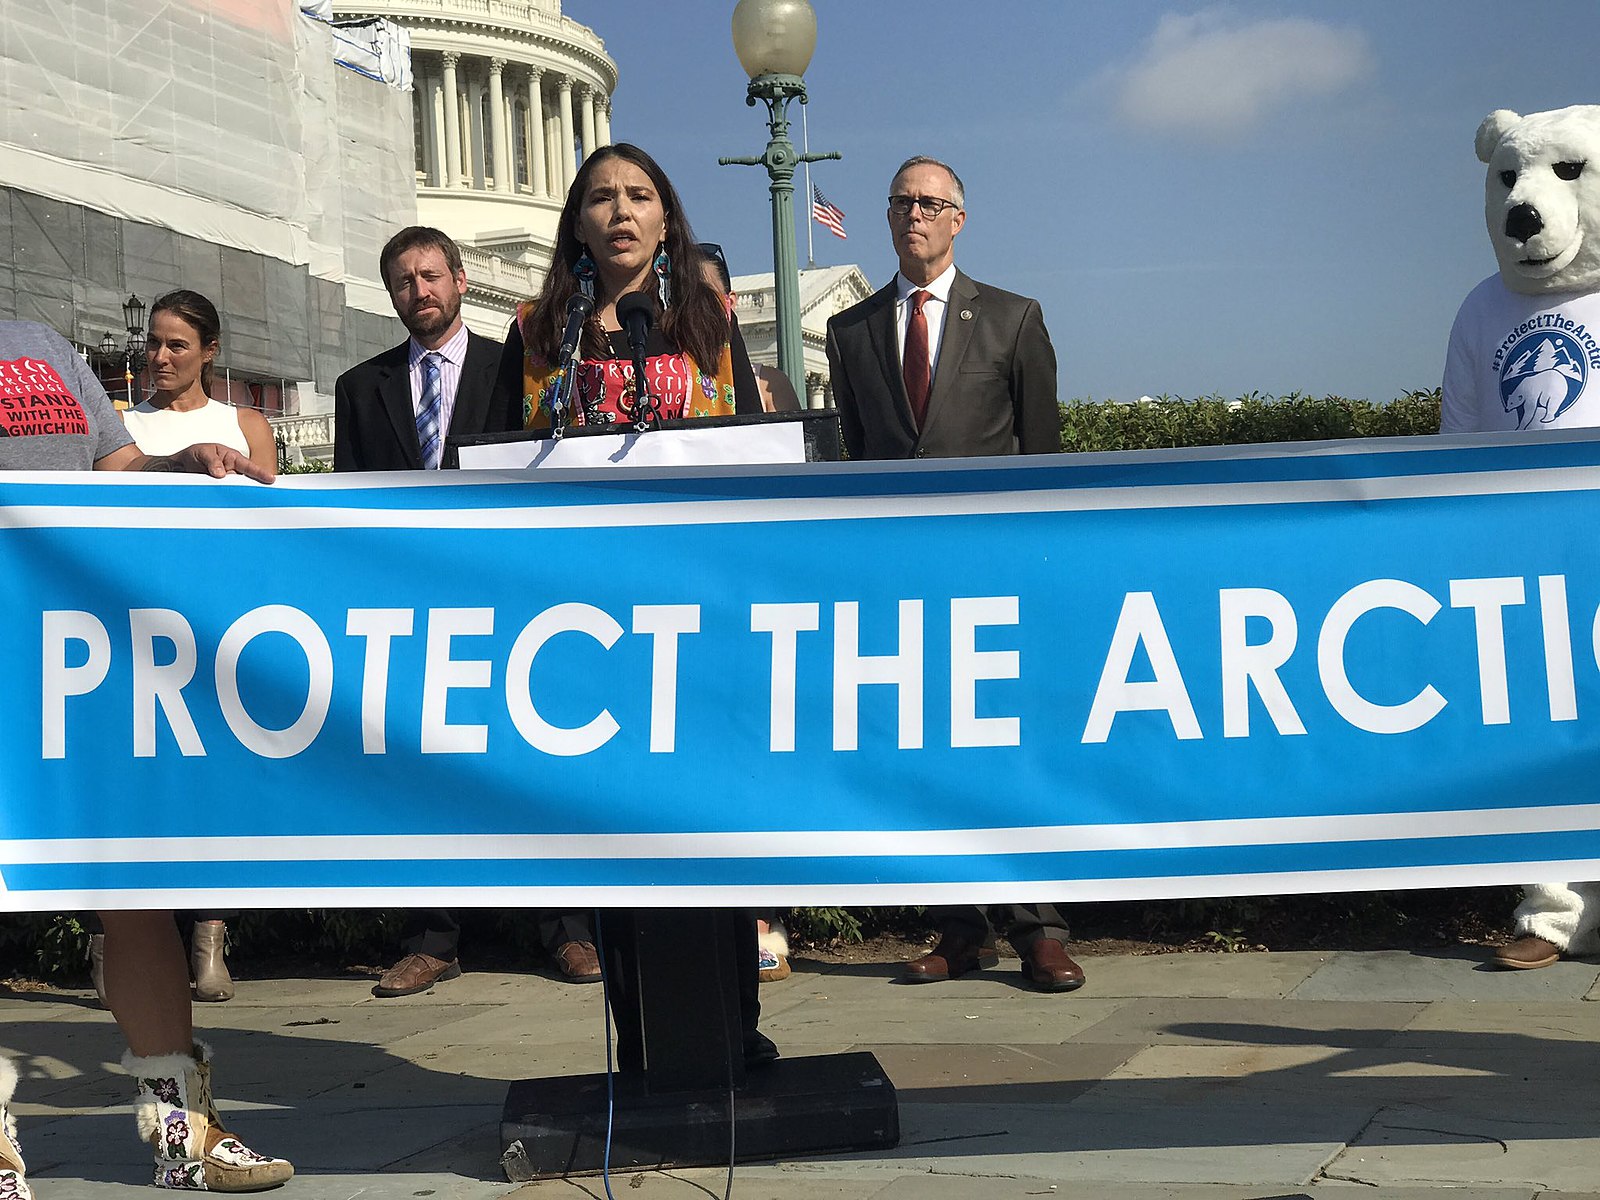 Bernadette Demietieff speaking in support of protect the Arctic to protect Gwich'in land from oil drilling.